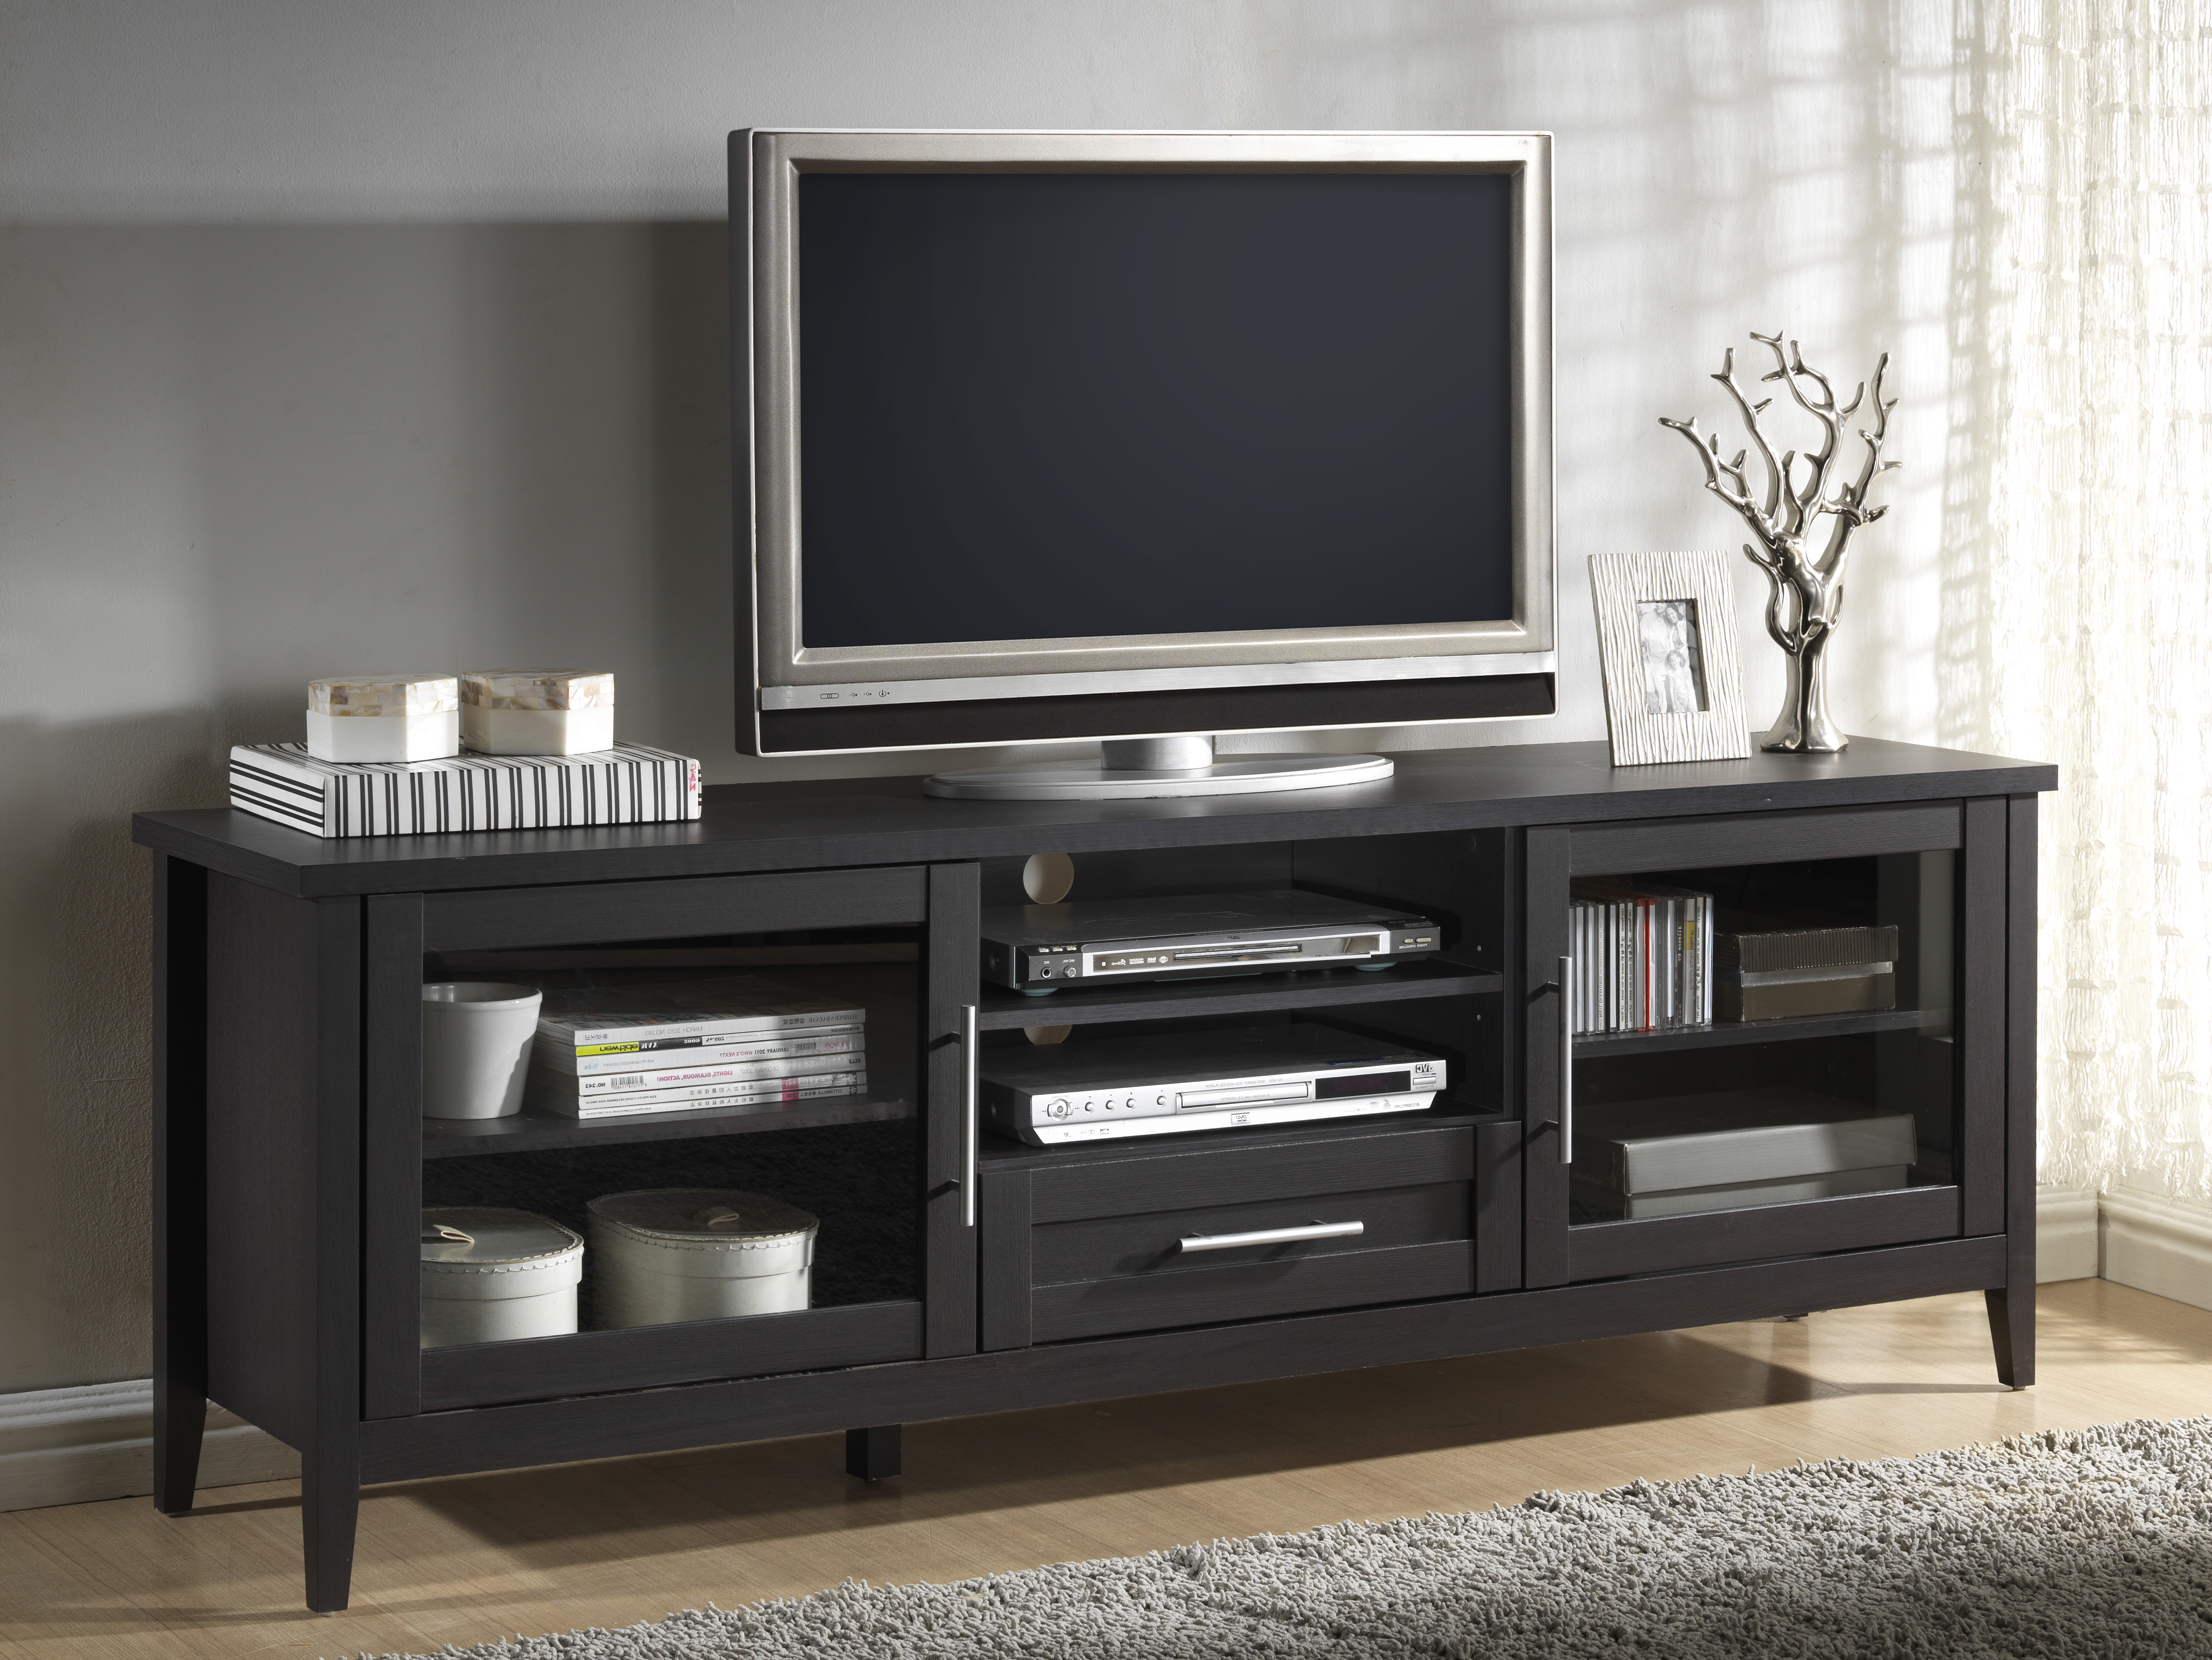 Baxton Studio Euclid Espresso Finished 2-Door and 1-Drawer TV Stand